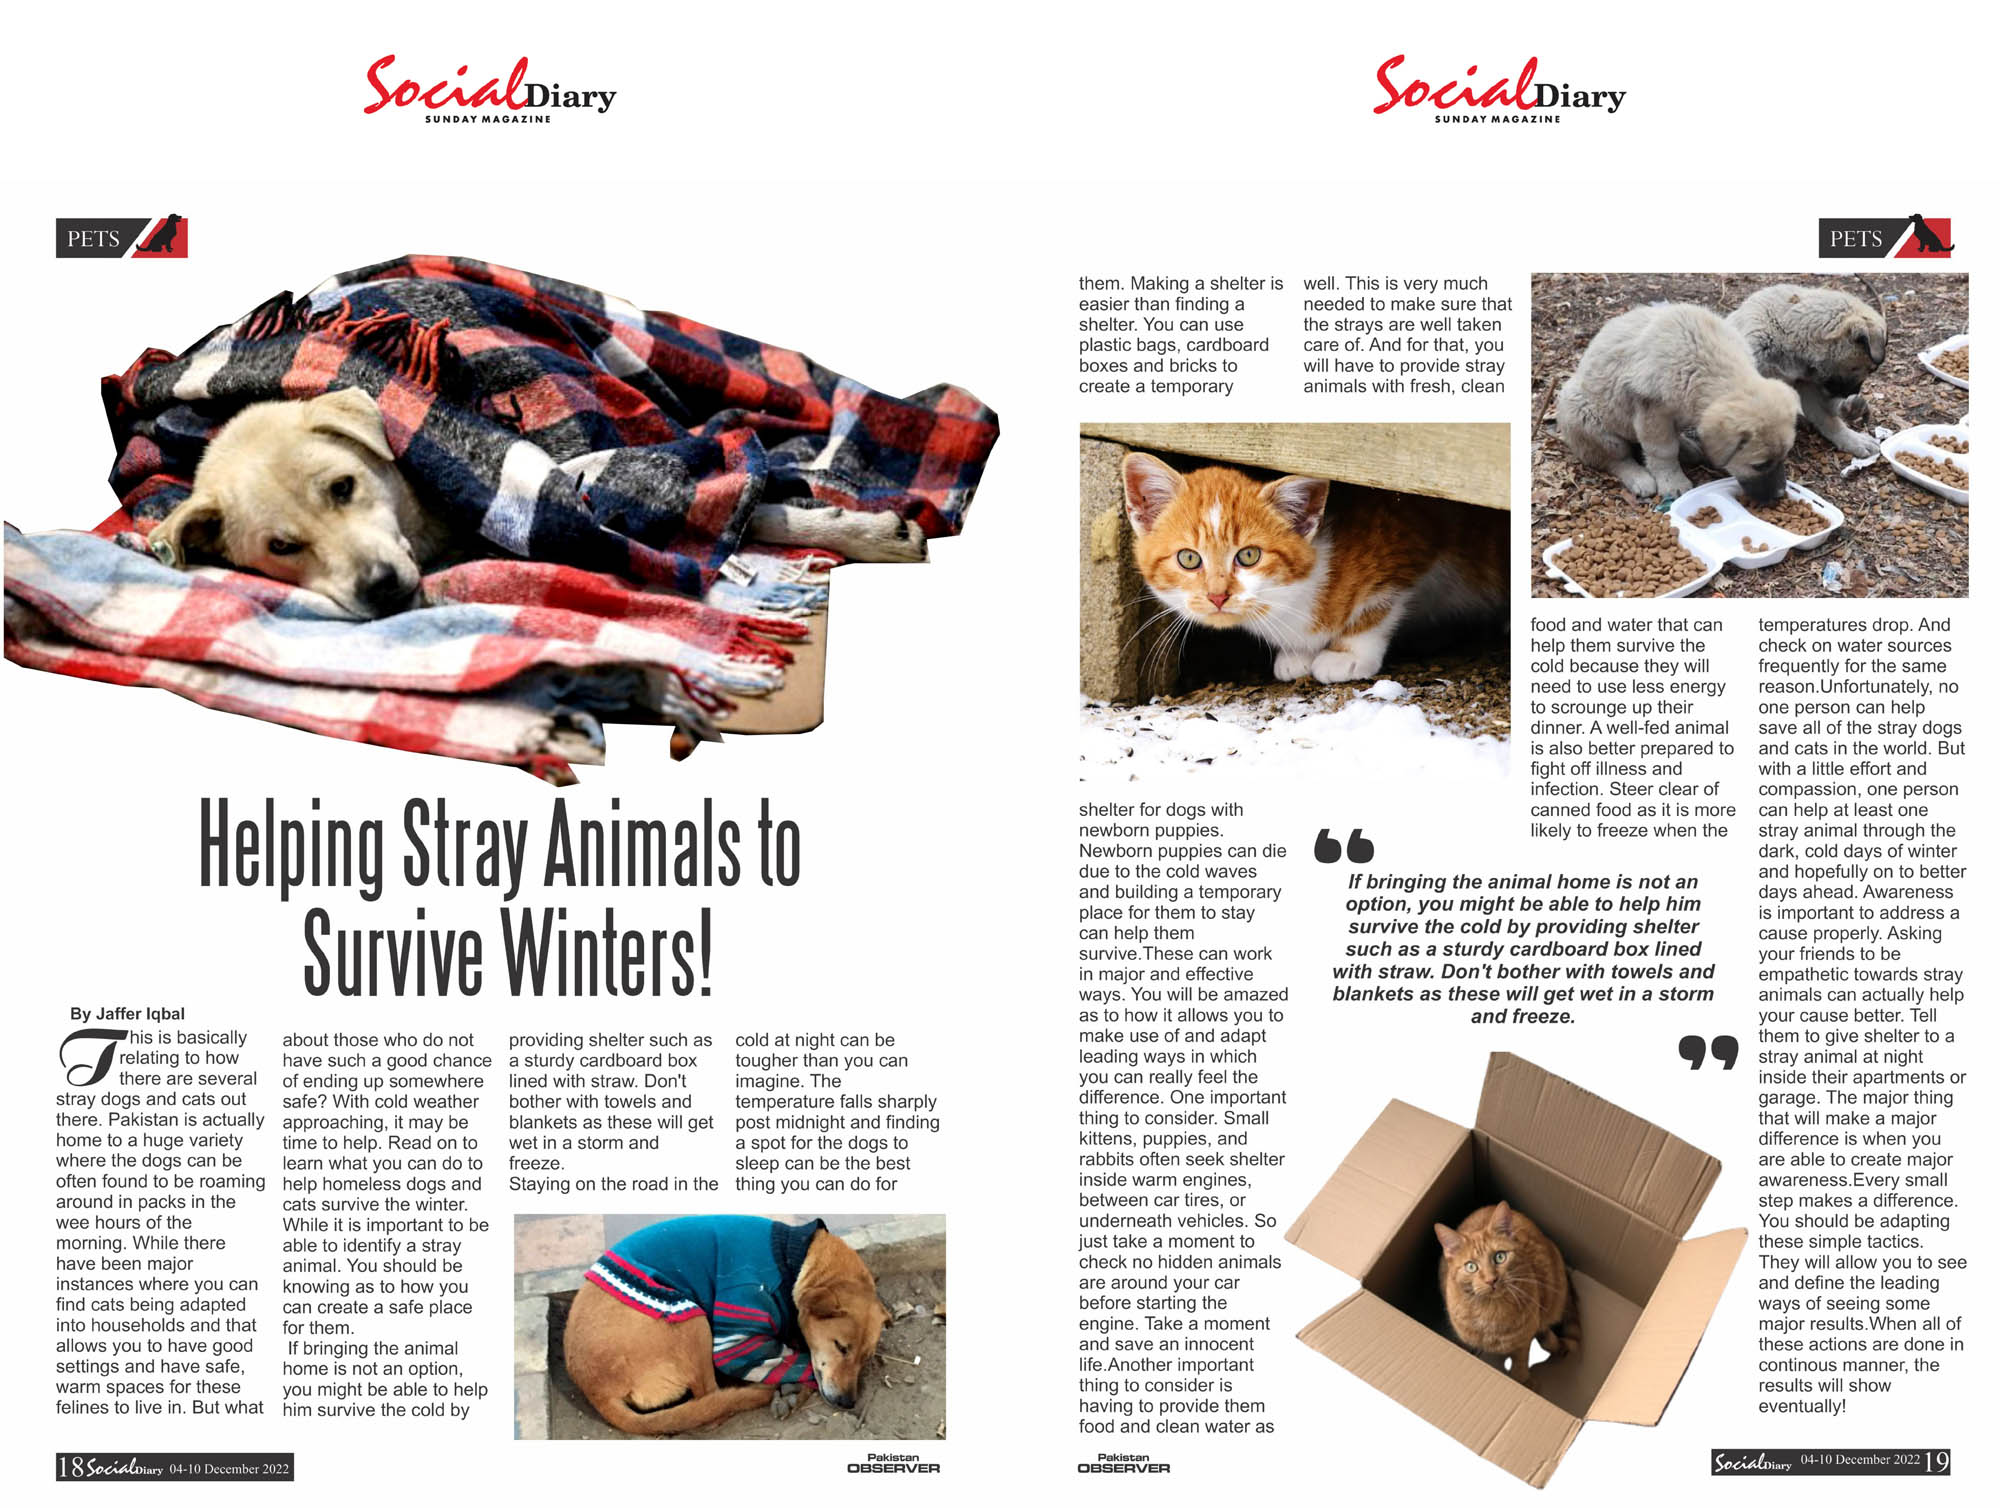 Helping Stray Animals to Survive Winters! – Social Diary